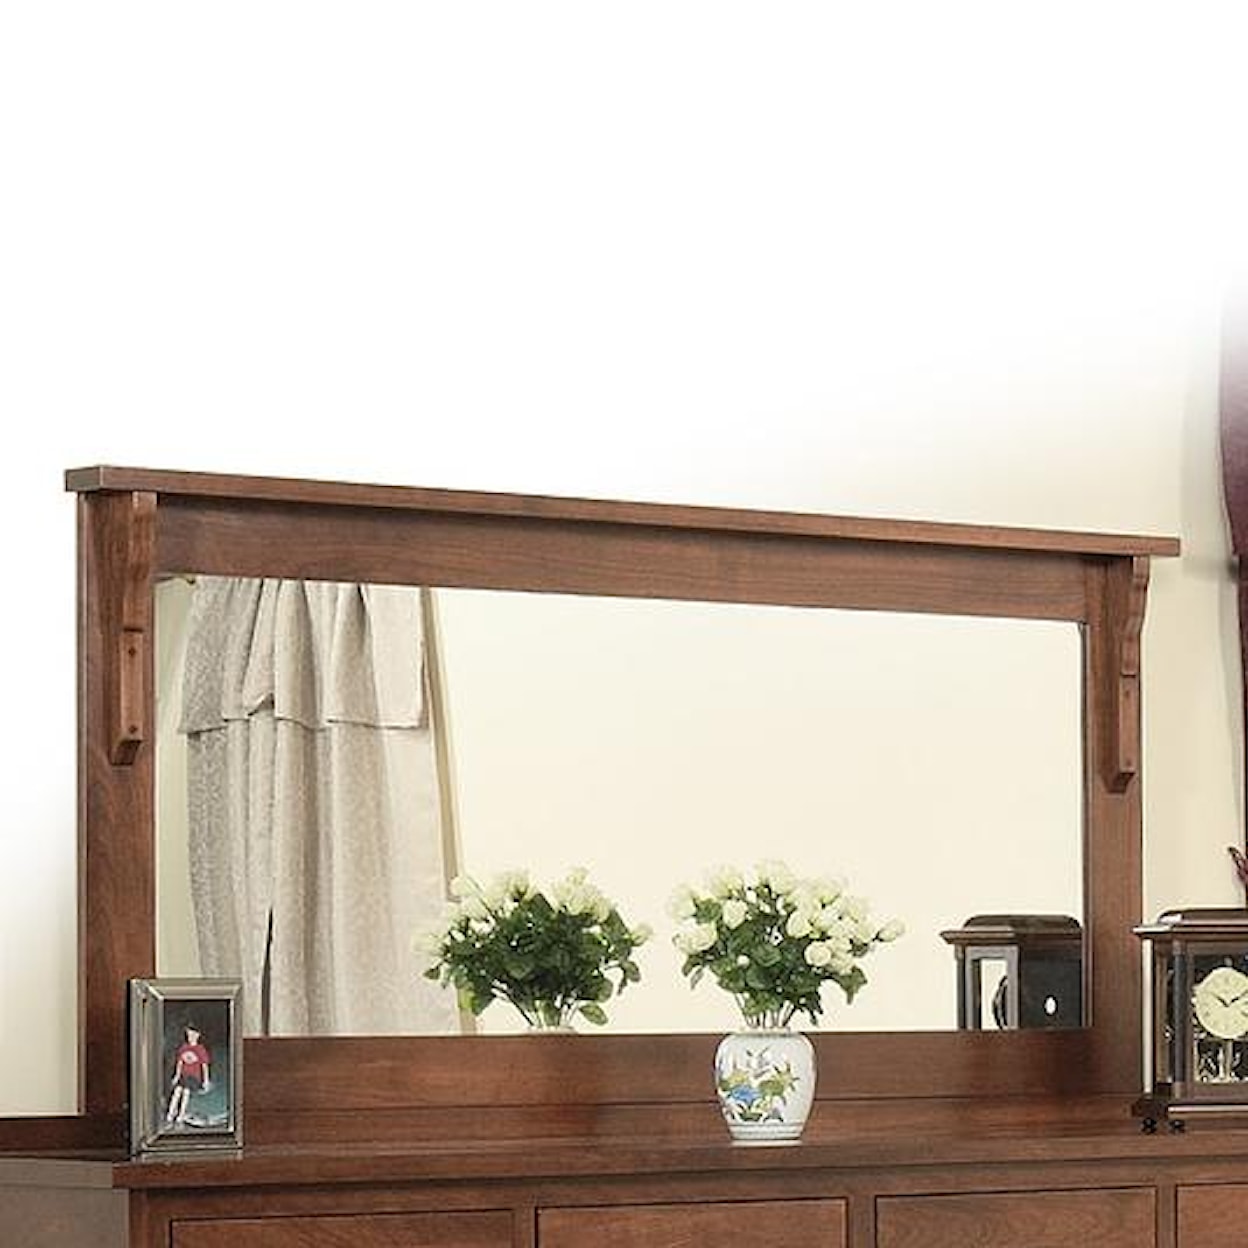 Daniel's Amish Mission Double Dresser with 58 X 28 Mirror